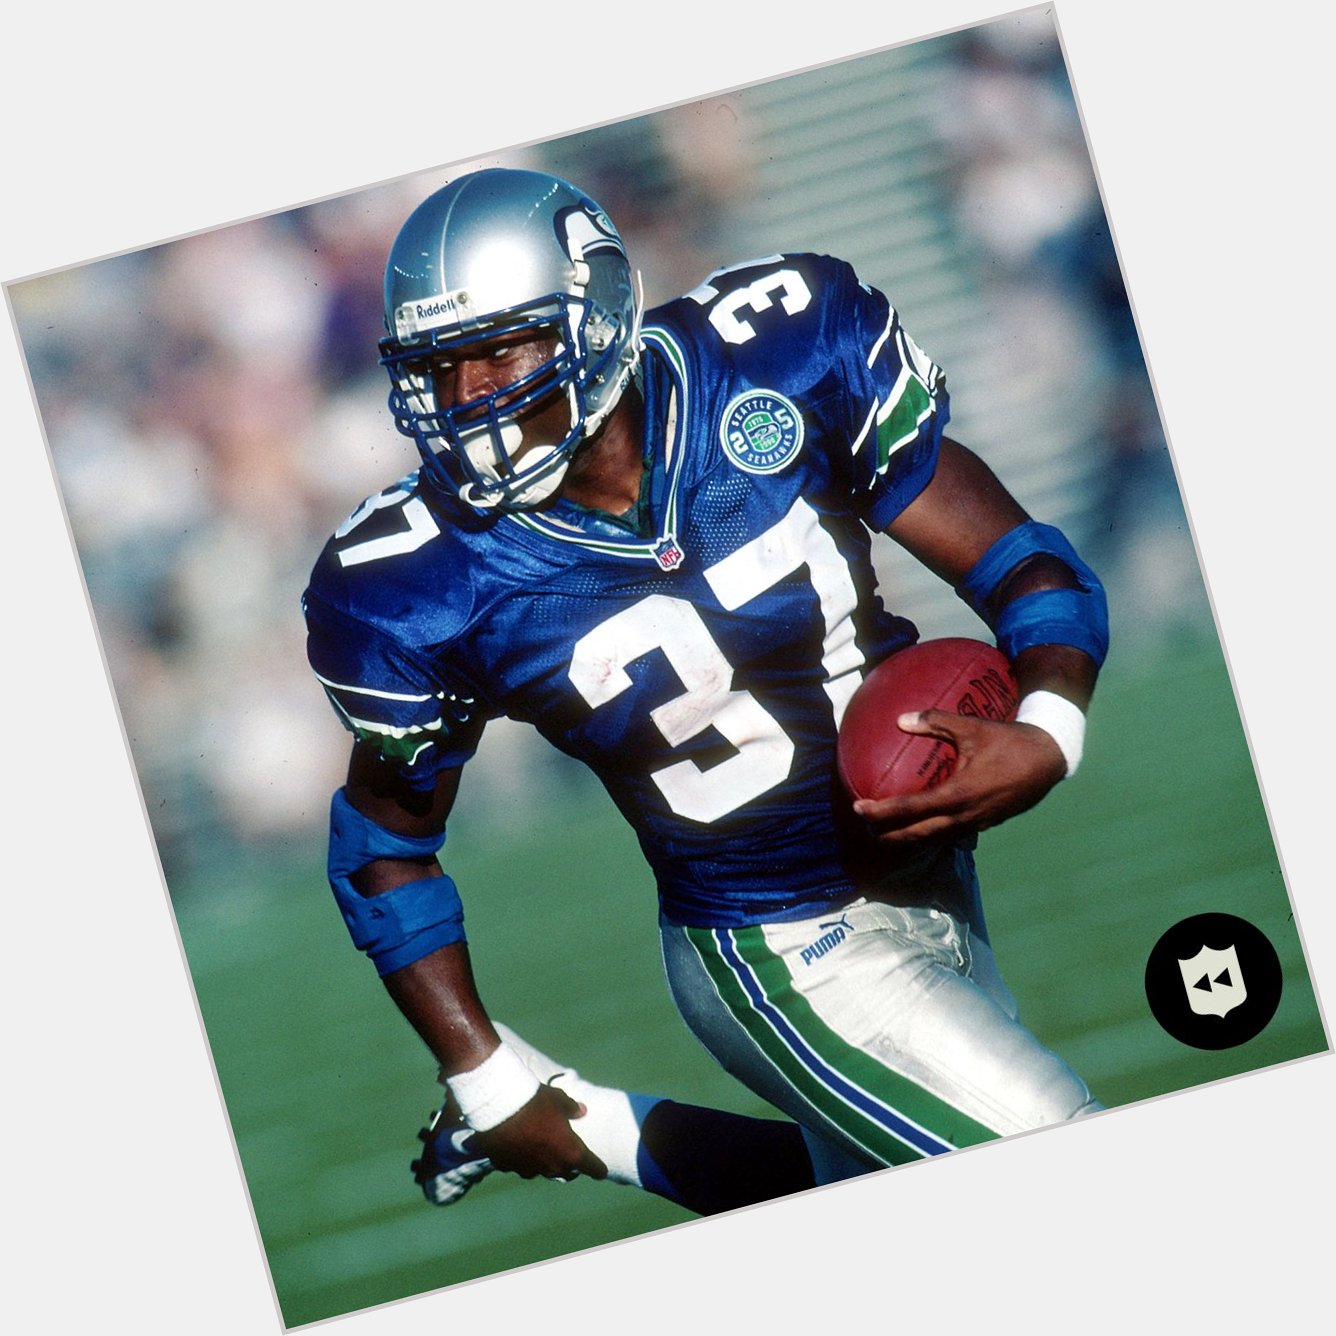 Happy Birthday to the all-time leading rusher for the Shaun Alexander!

